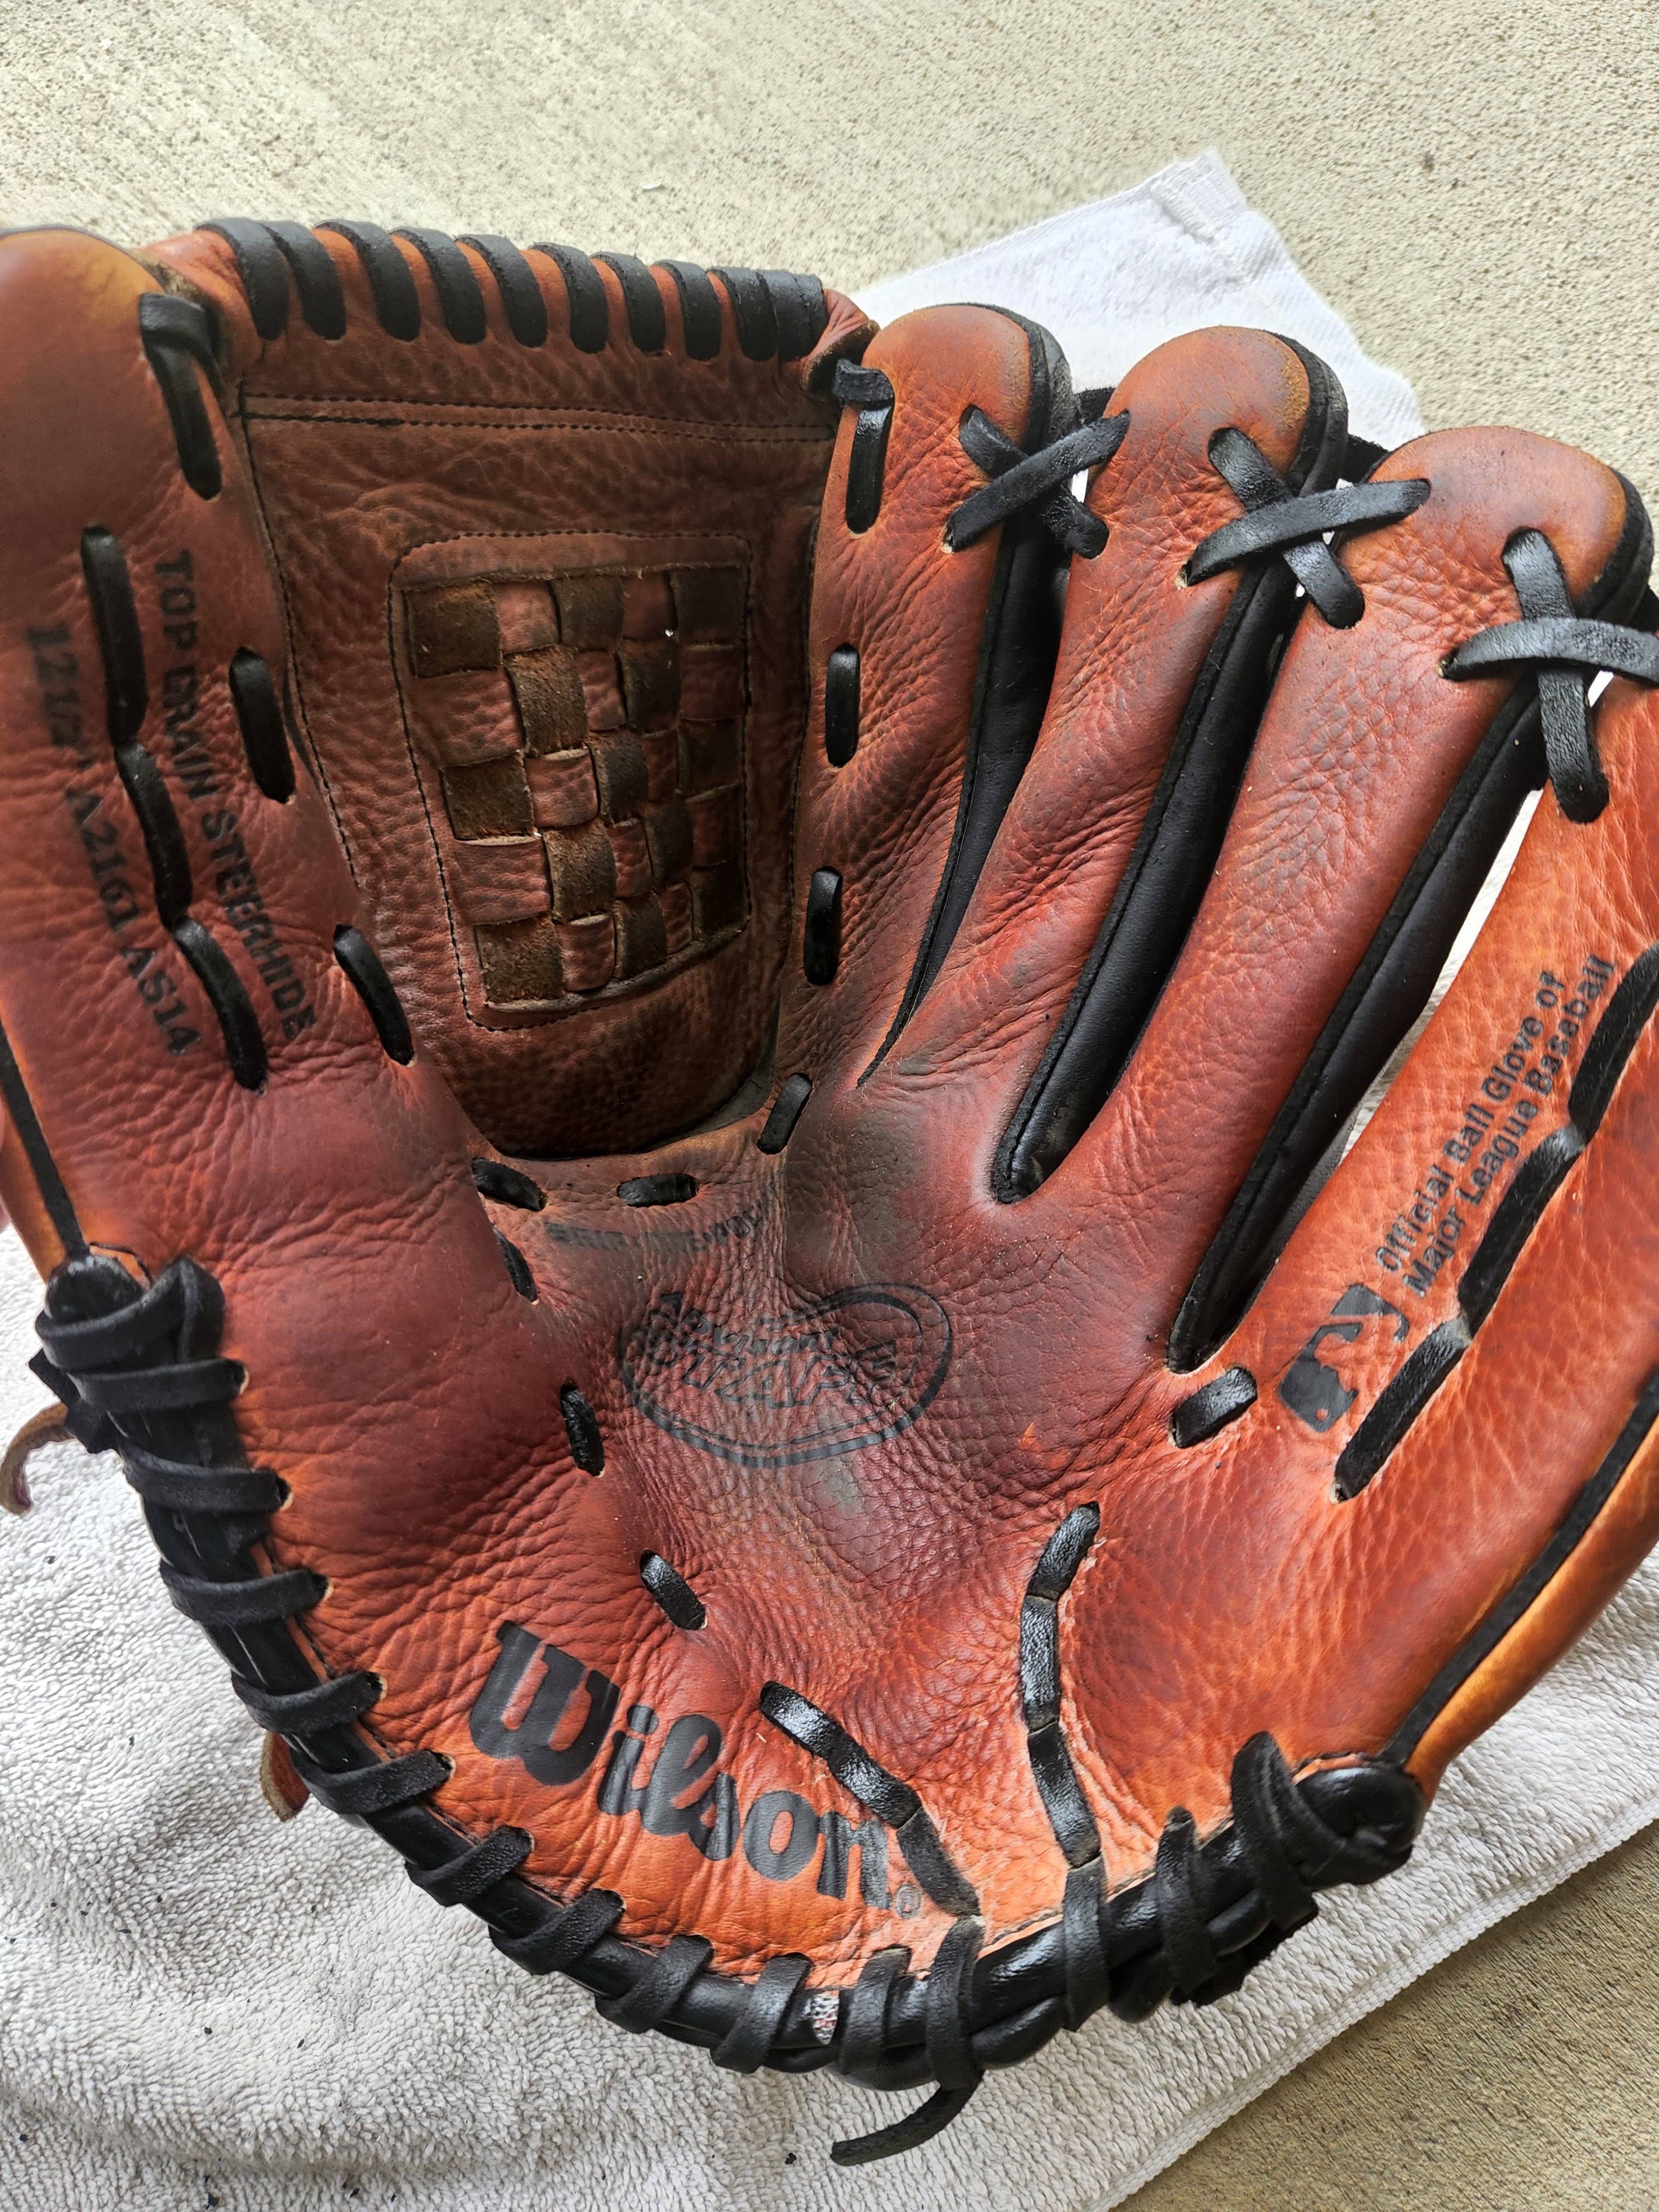 Wilson Advisory Staff Game-Ready All-Leather Shell Utility All-Positions Baseball Glove for Right and Left Hand Throw 